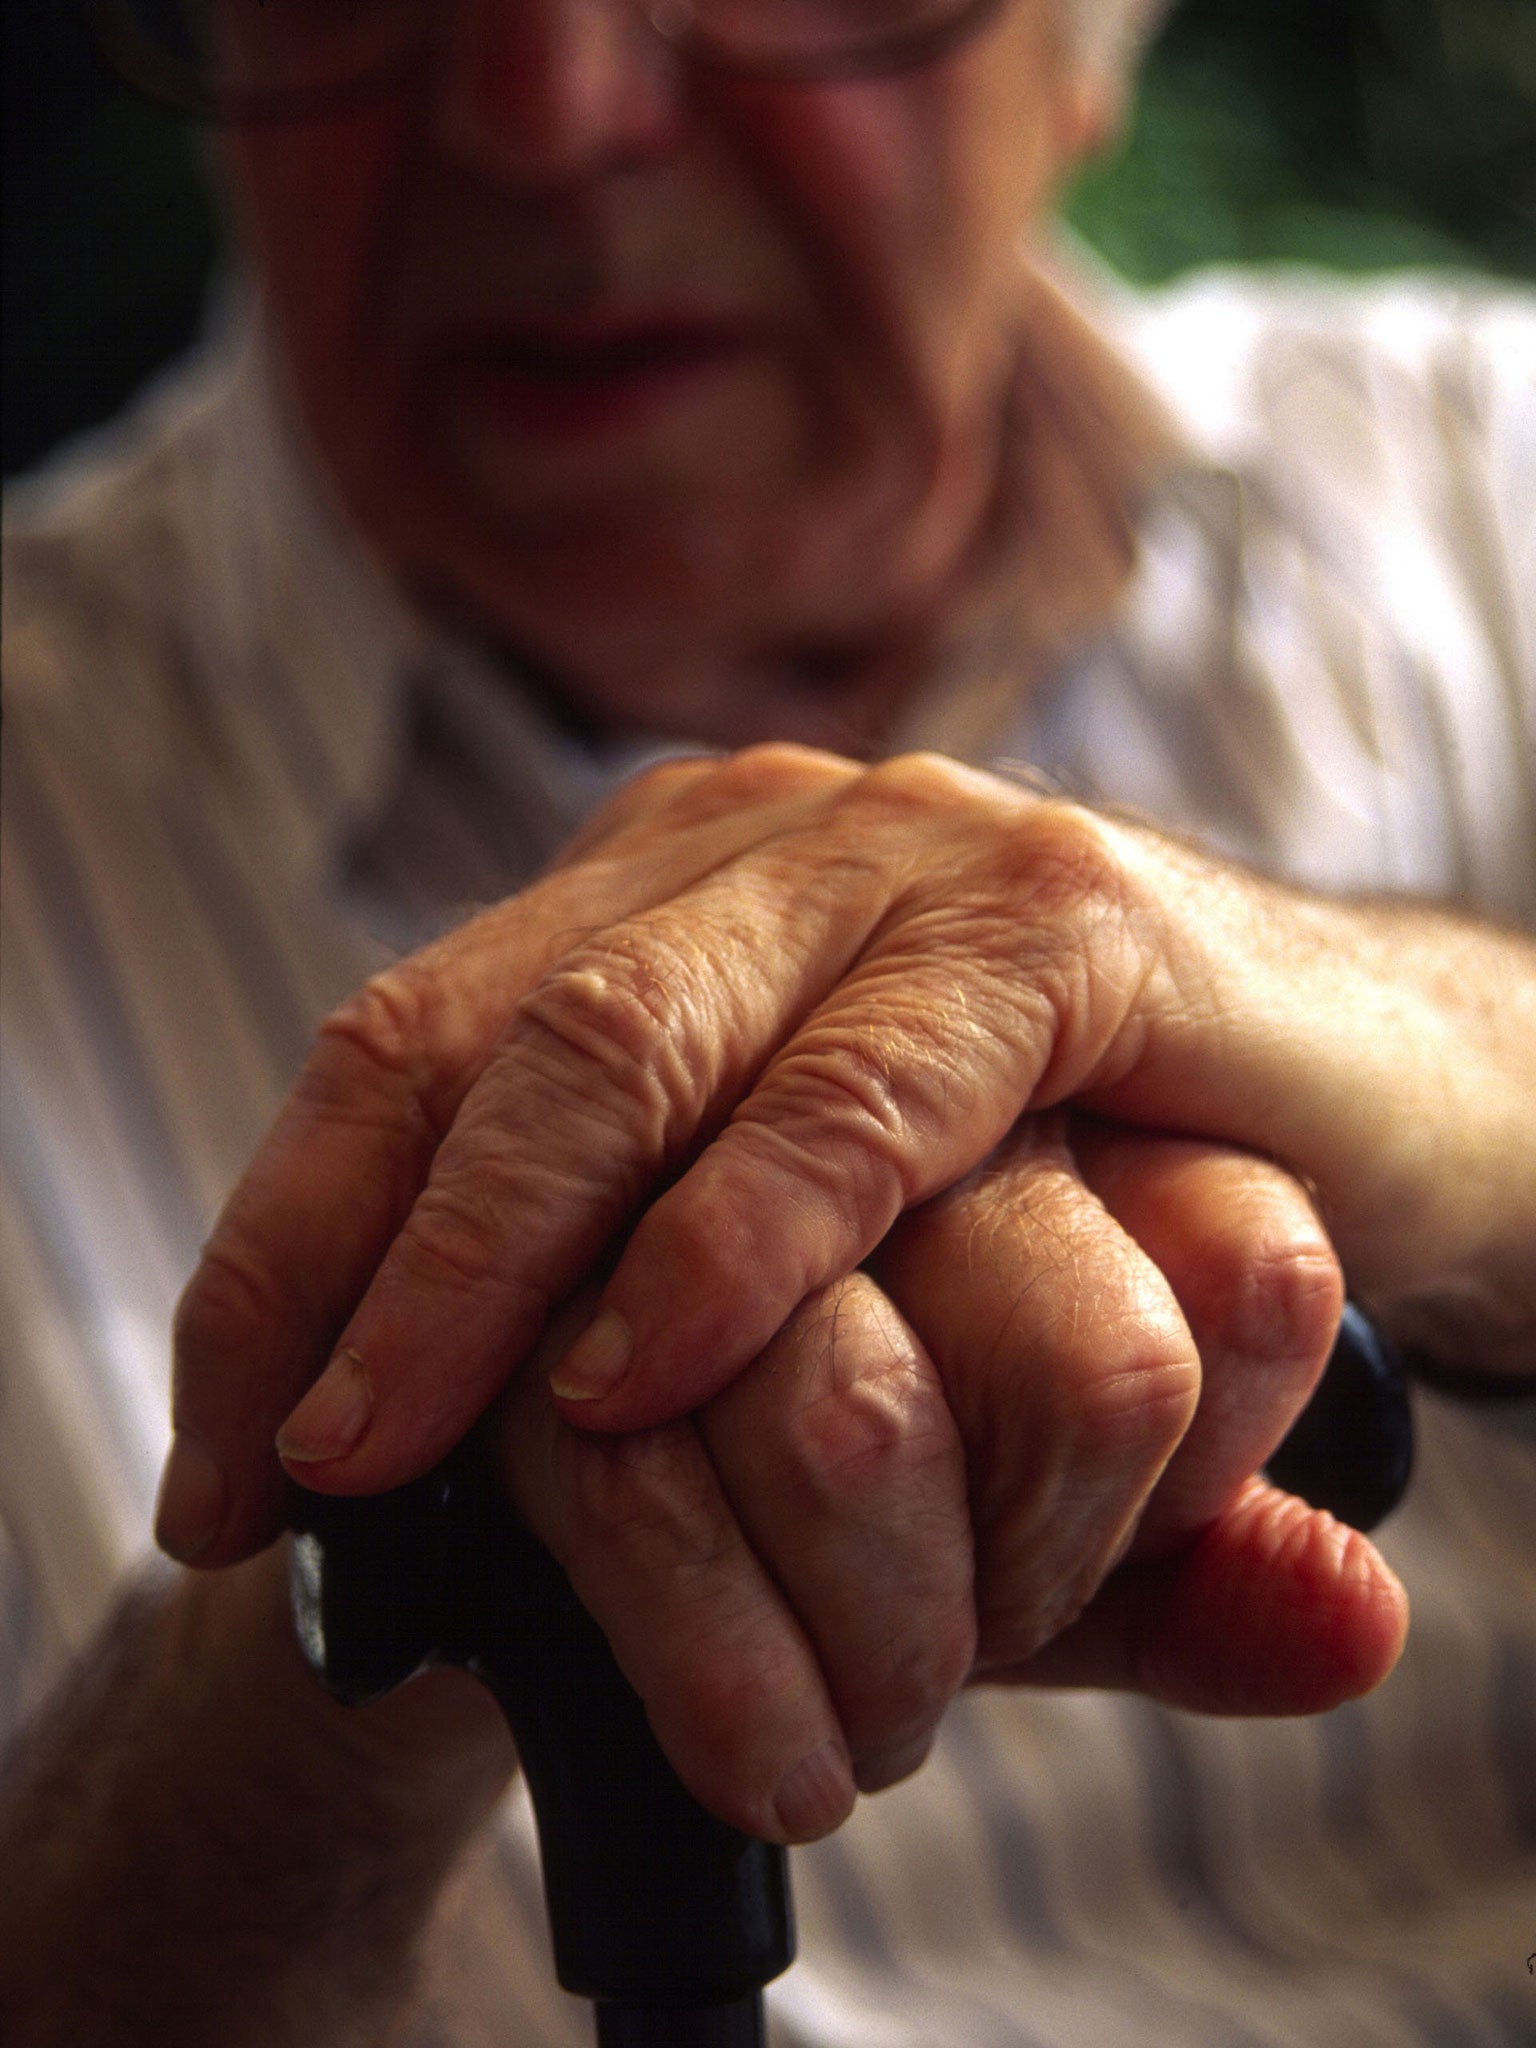 Some say hands can give away a person's age, but a new lifespan tests claims to find out how old you really are